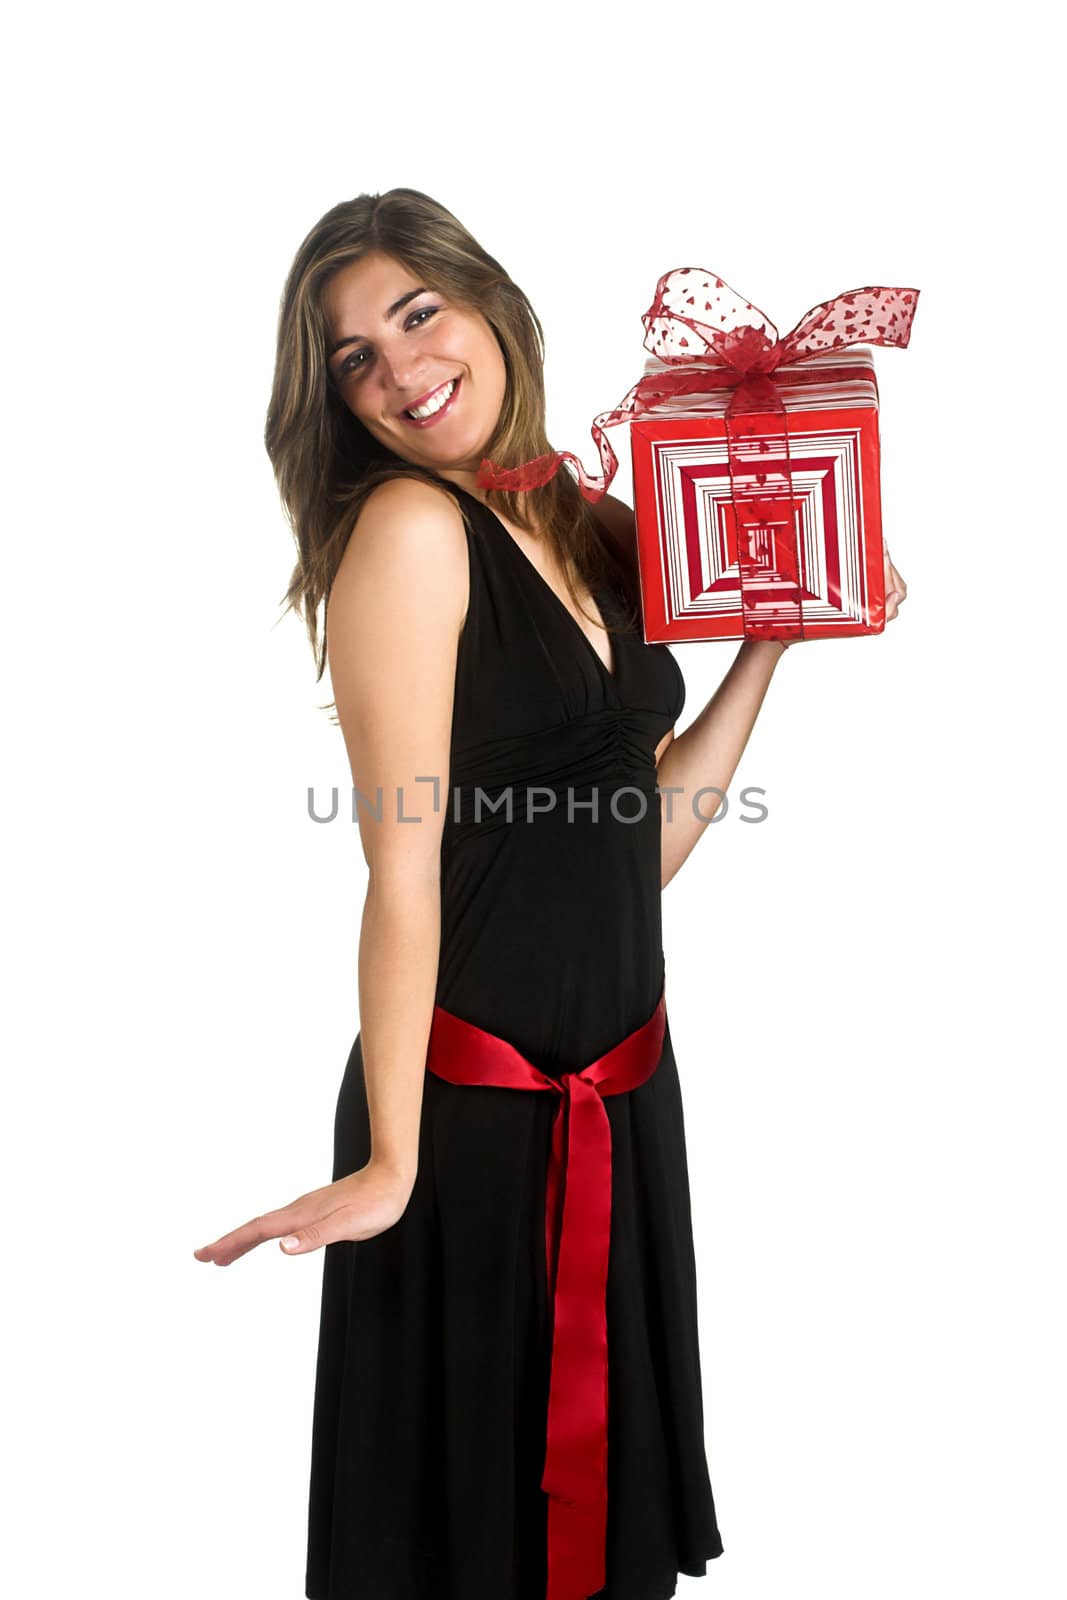 Happyl woman isolated on a white background with presents.